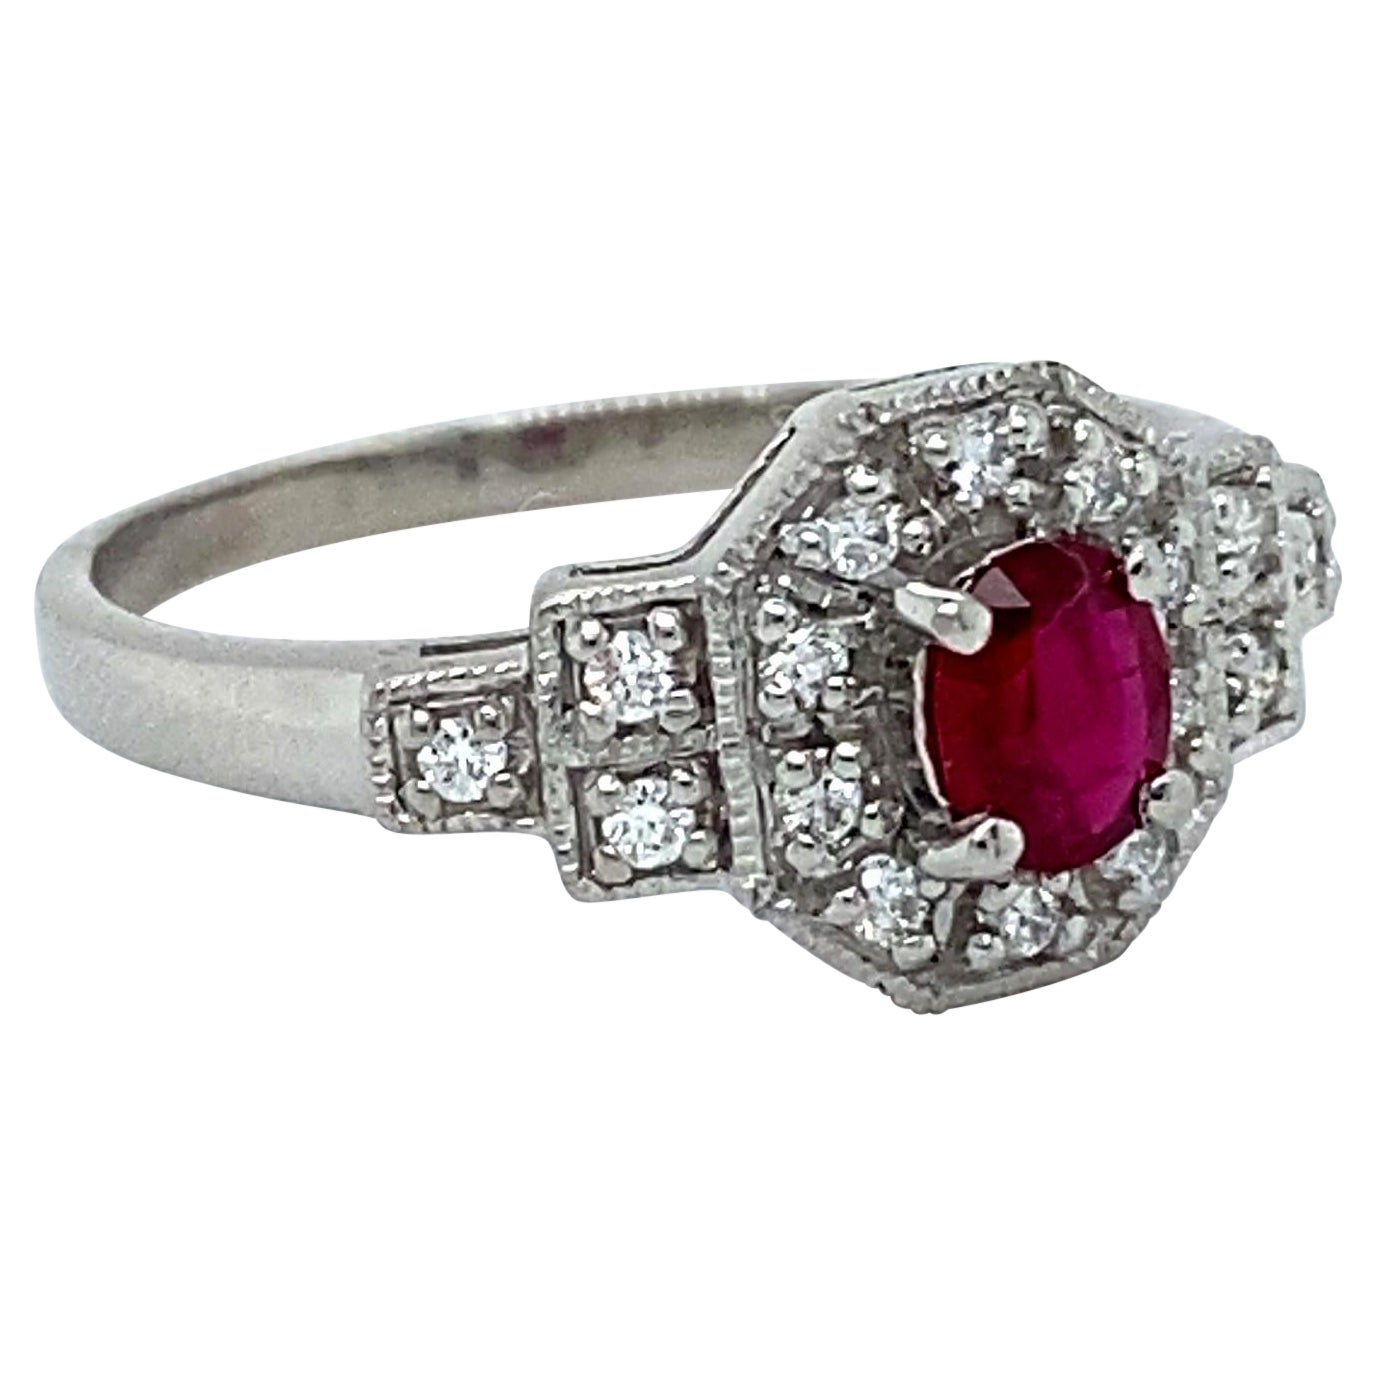 Lovely Art Deco Platinum Diamond and Ruby Ring Engagement Ring Wedding Ring